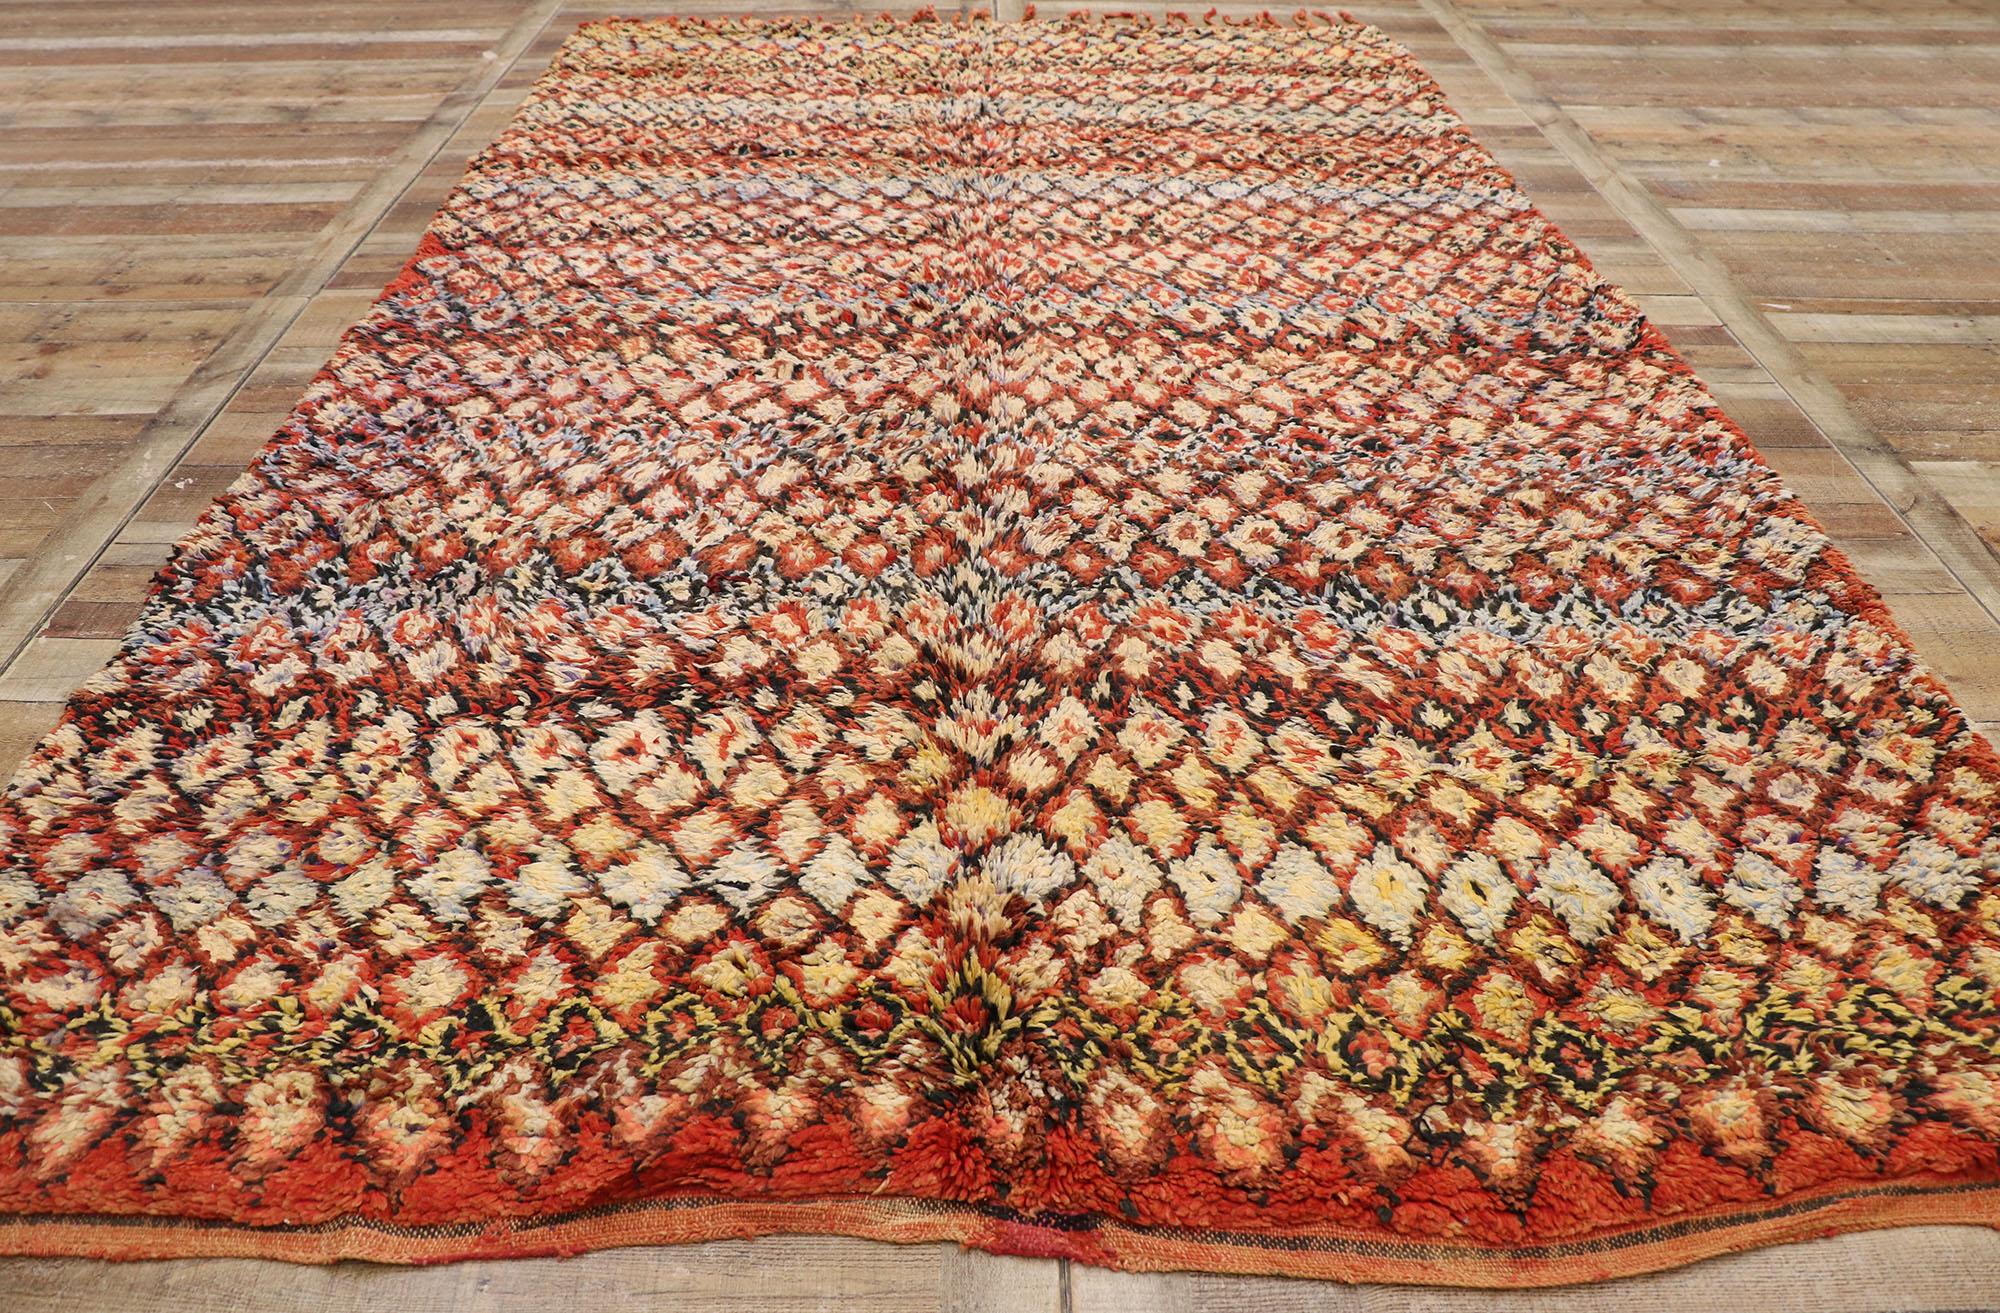 Wool Vintage Berber Boujad Moroccan Rug with Mid-Century Modern Style For Sale